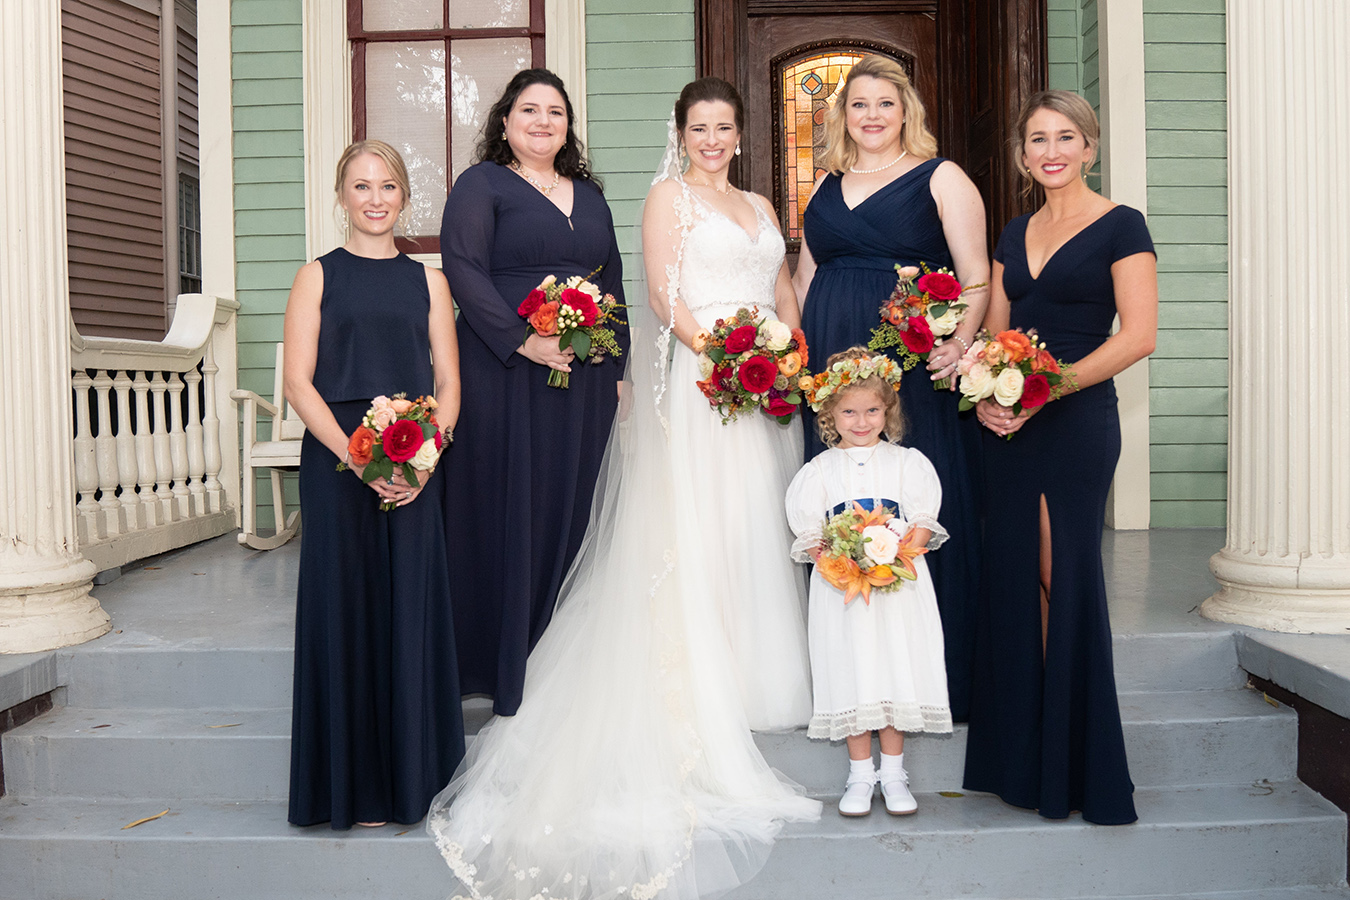 Margaret and her bridesmaids wore BHLDN gowns.